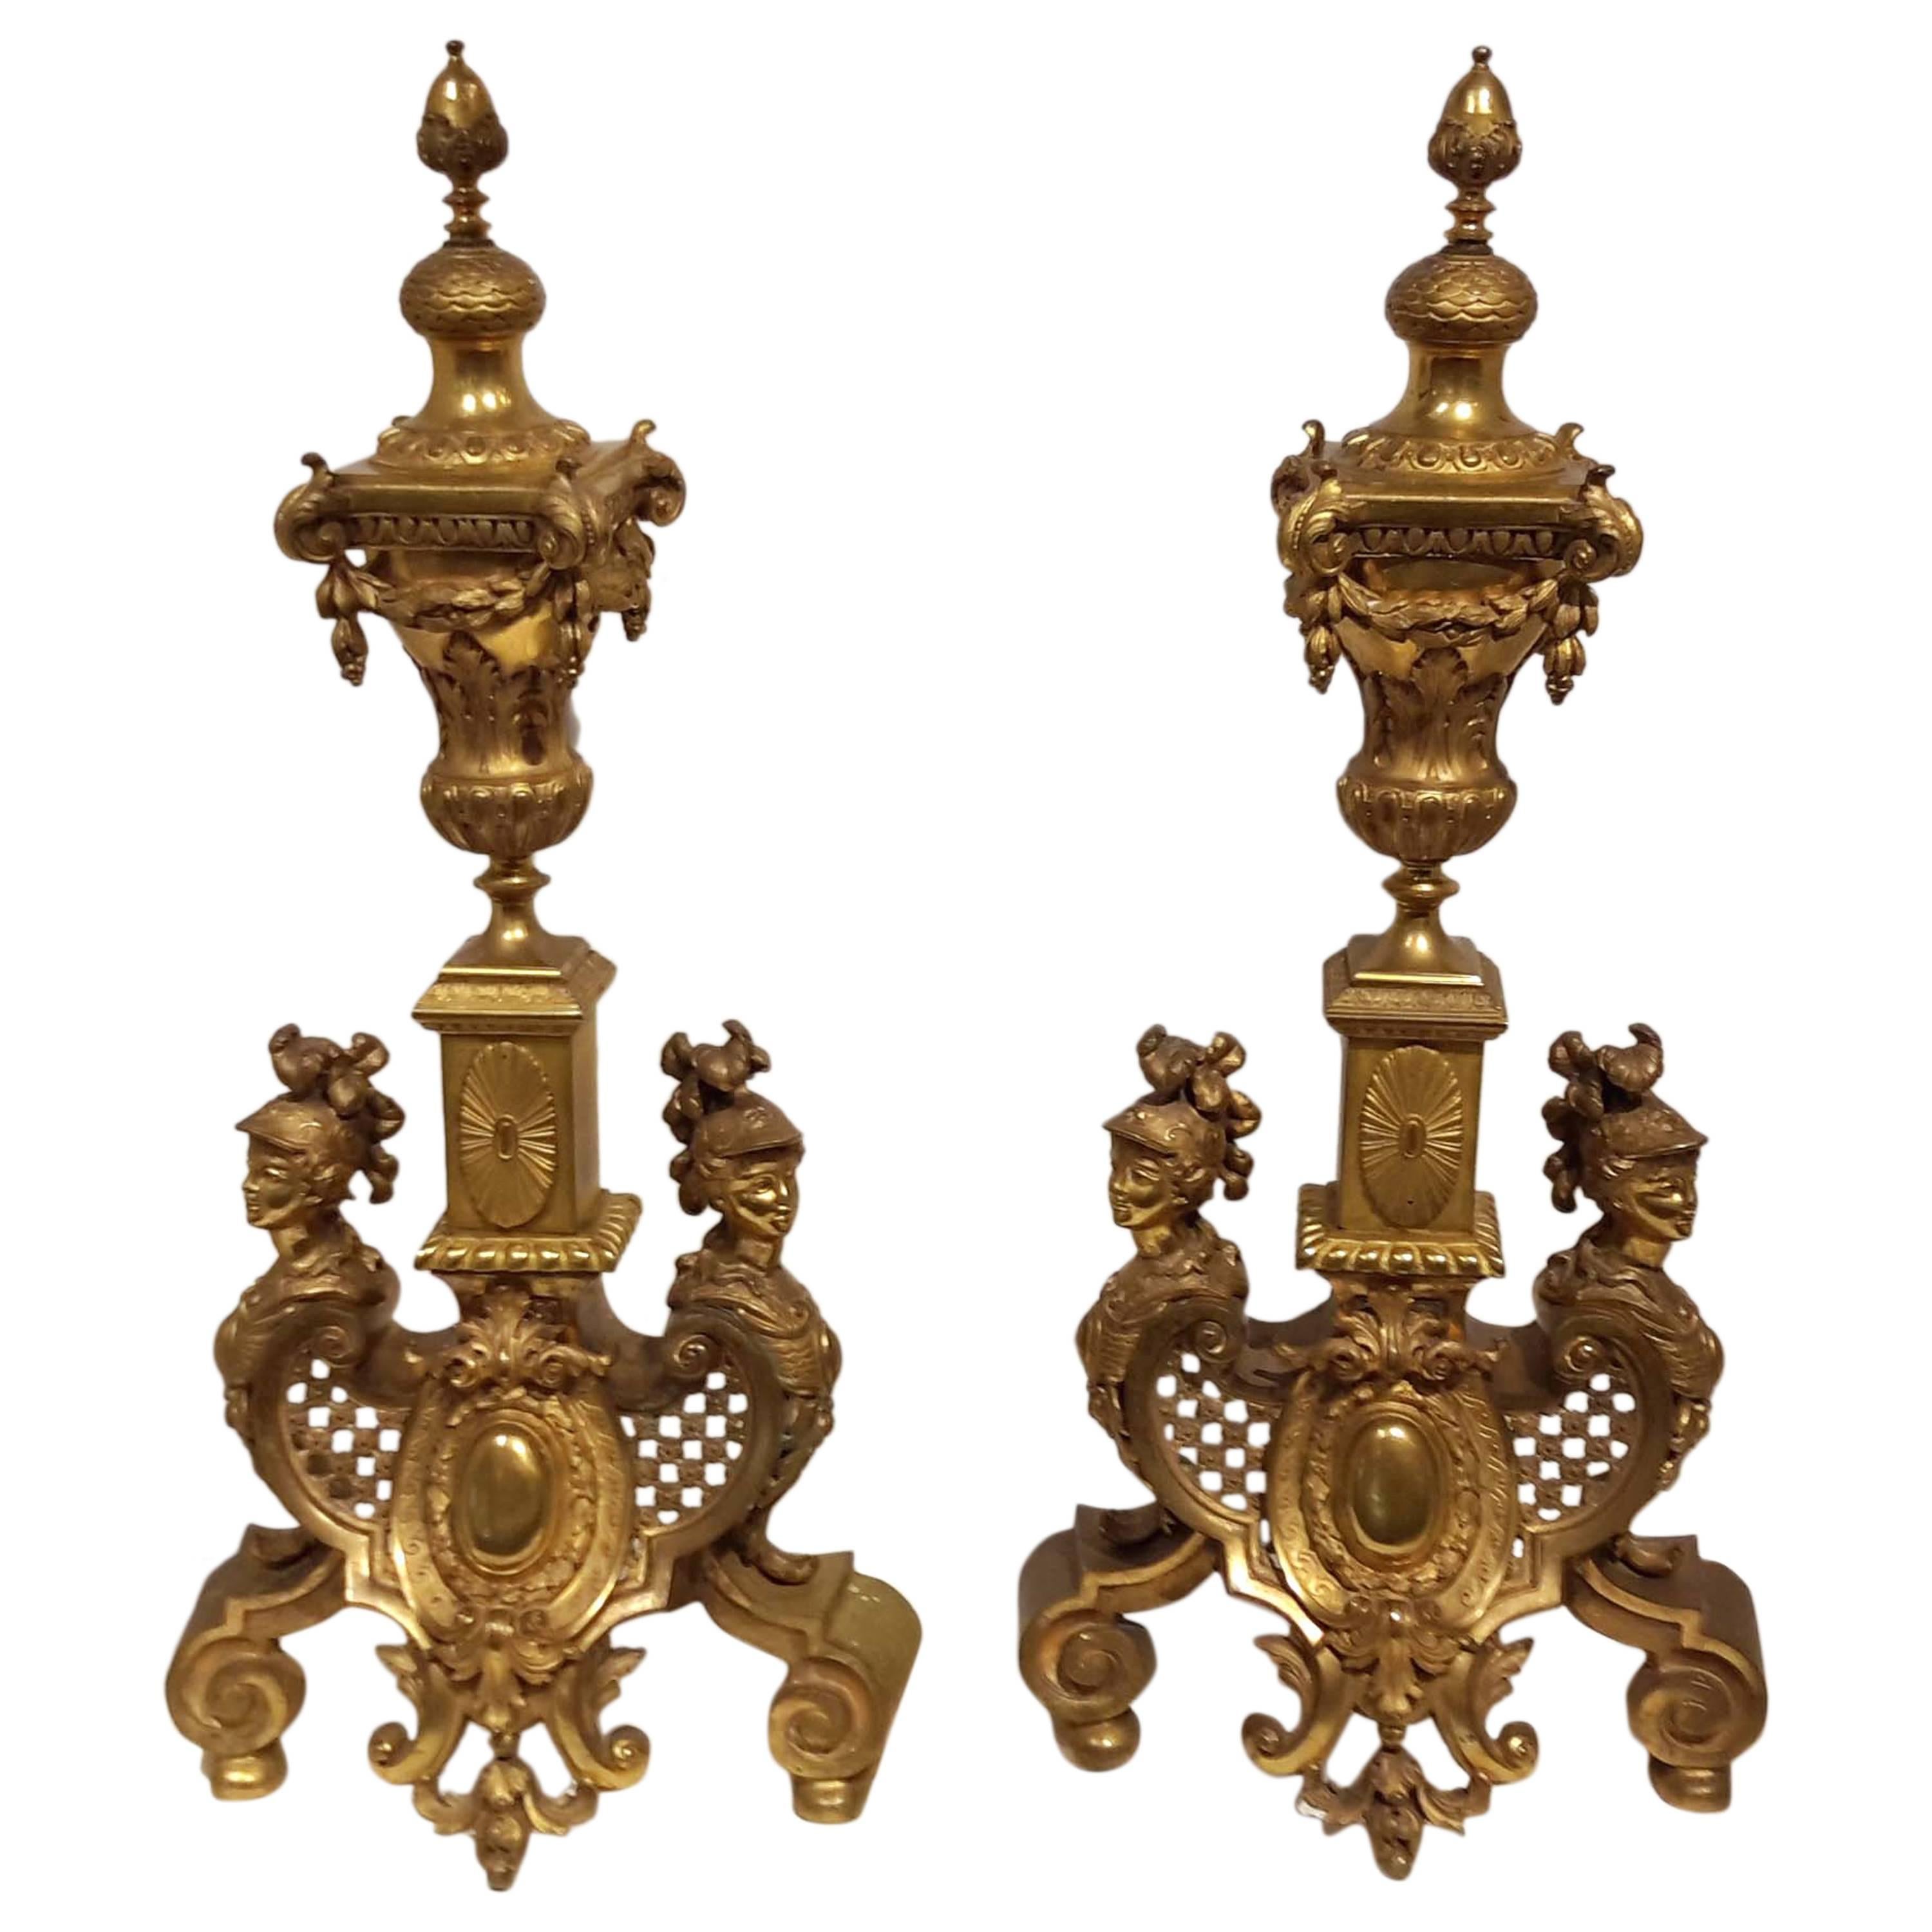 Pair of Louis XIV Style Gilt Bronze Fireplace Chenets, 19th Century